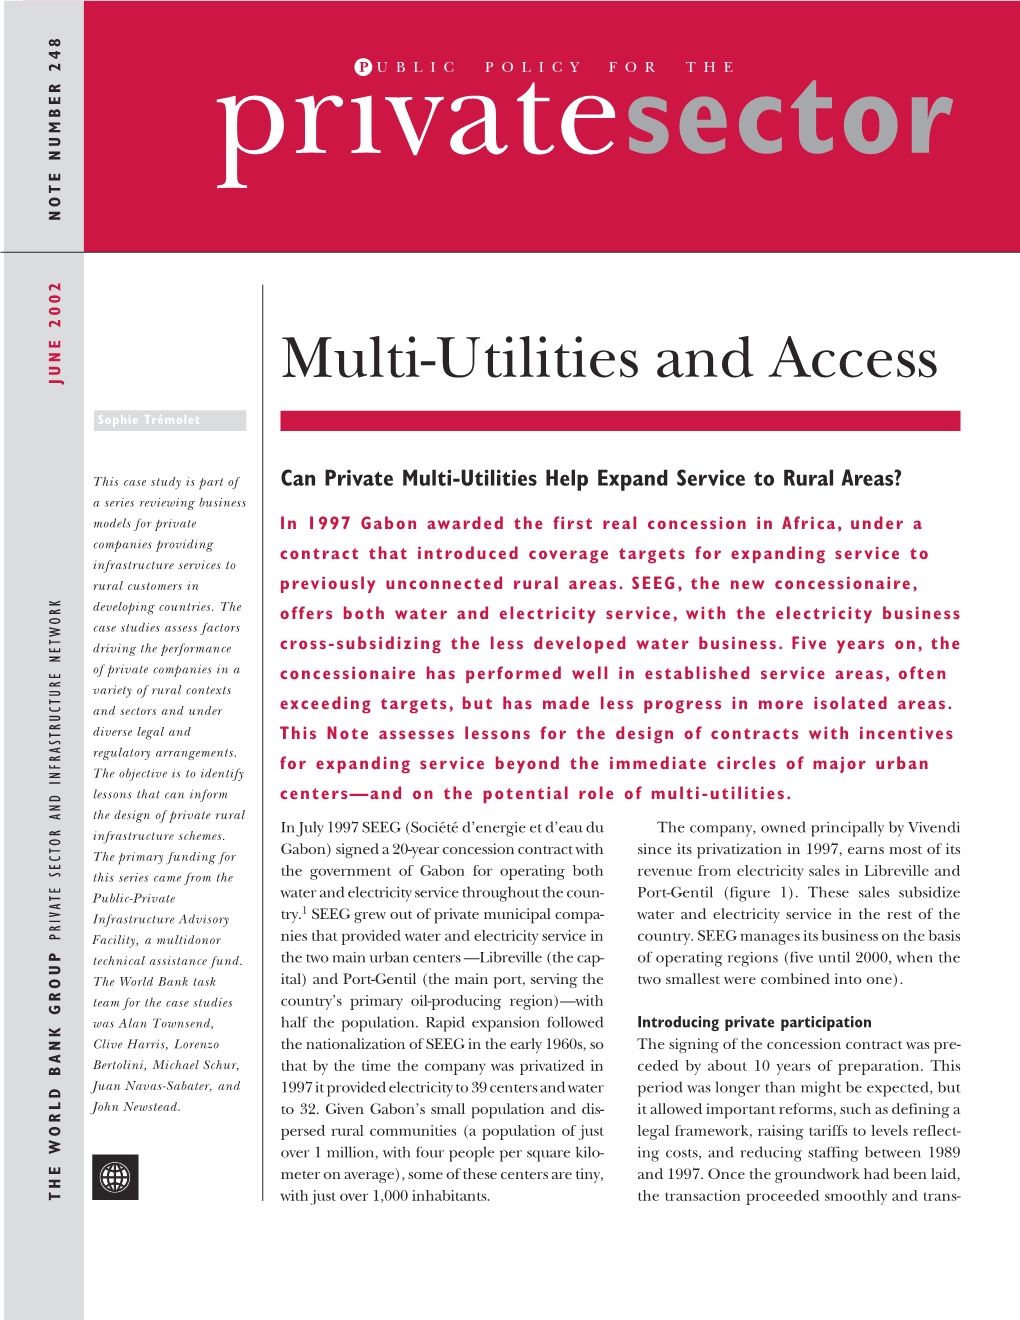 Multi-Utilities and Access